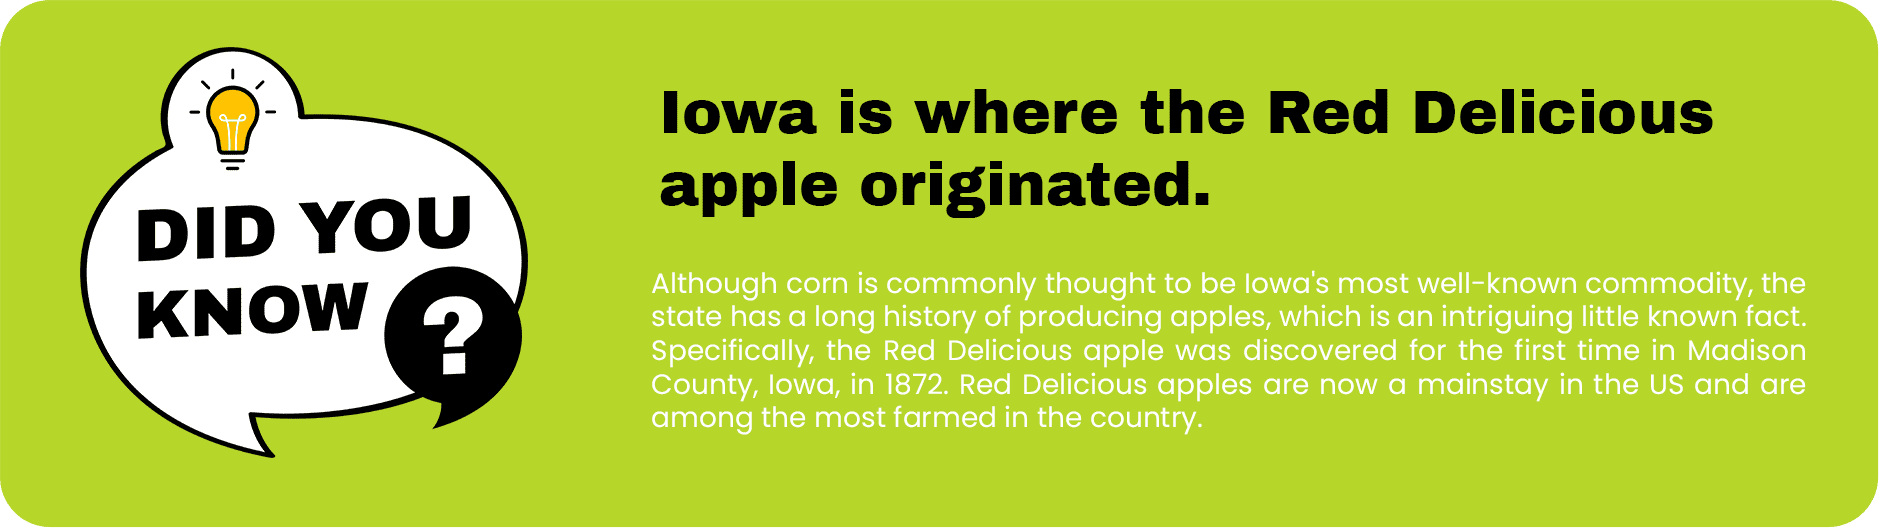 An educational banner highlighting that the preferred red delicious apple originated in Iowa.